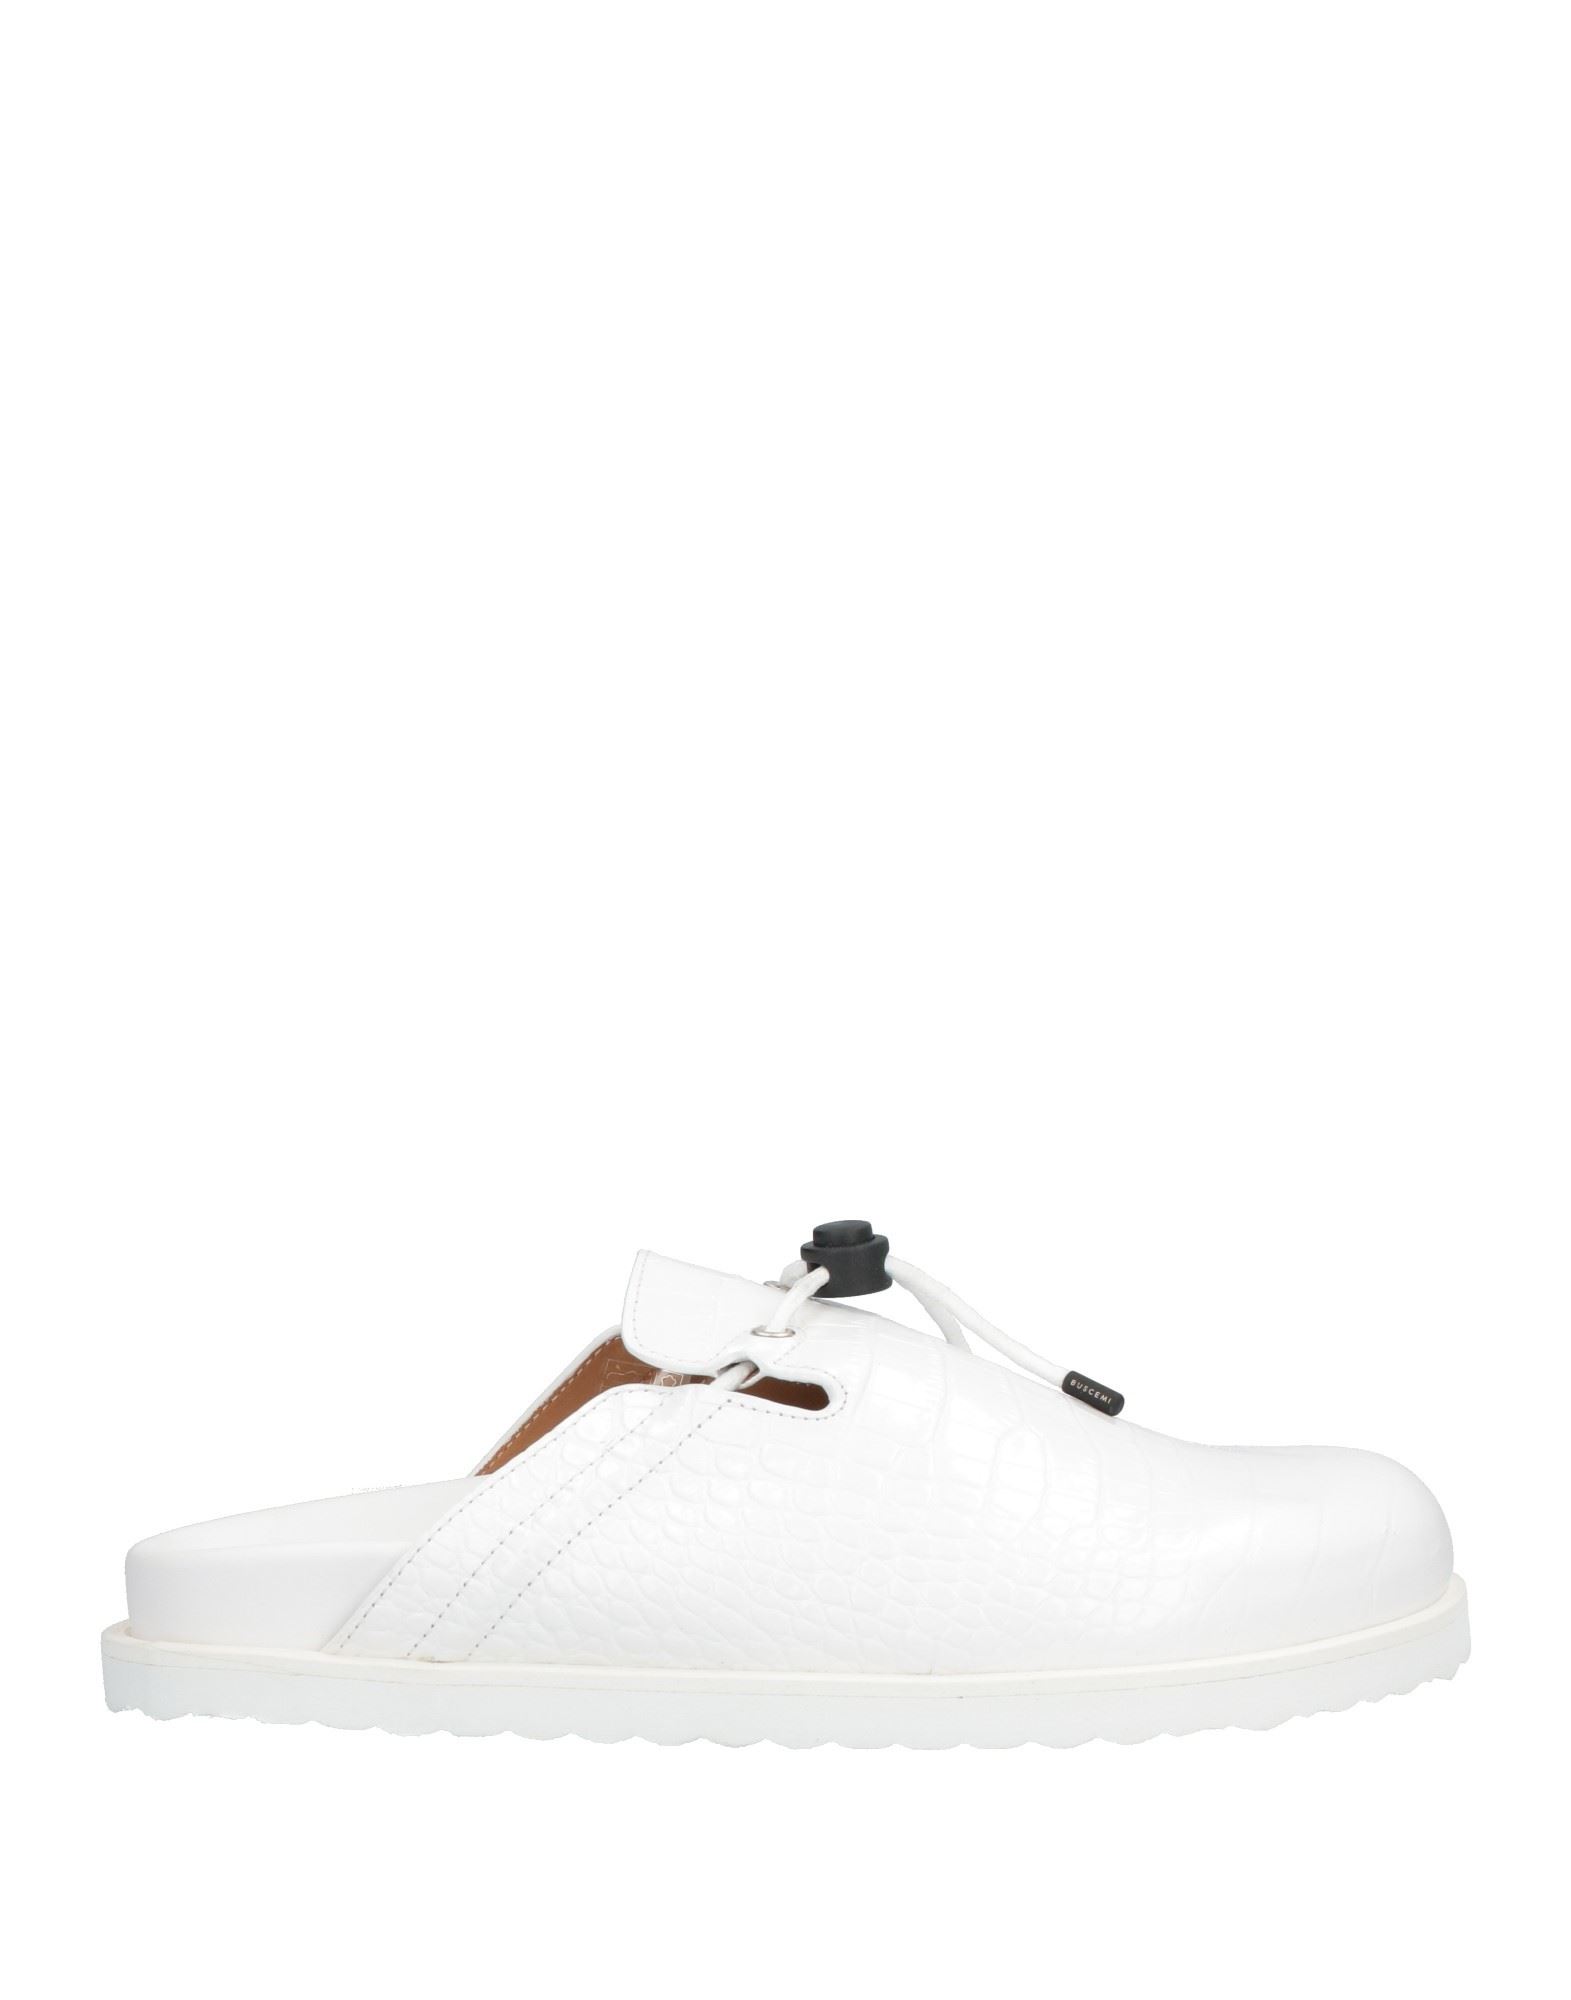 Buscemi Man Mules & Clogs White Size 5 Soft Leather